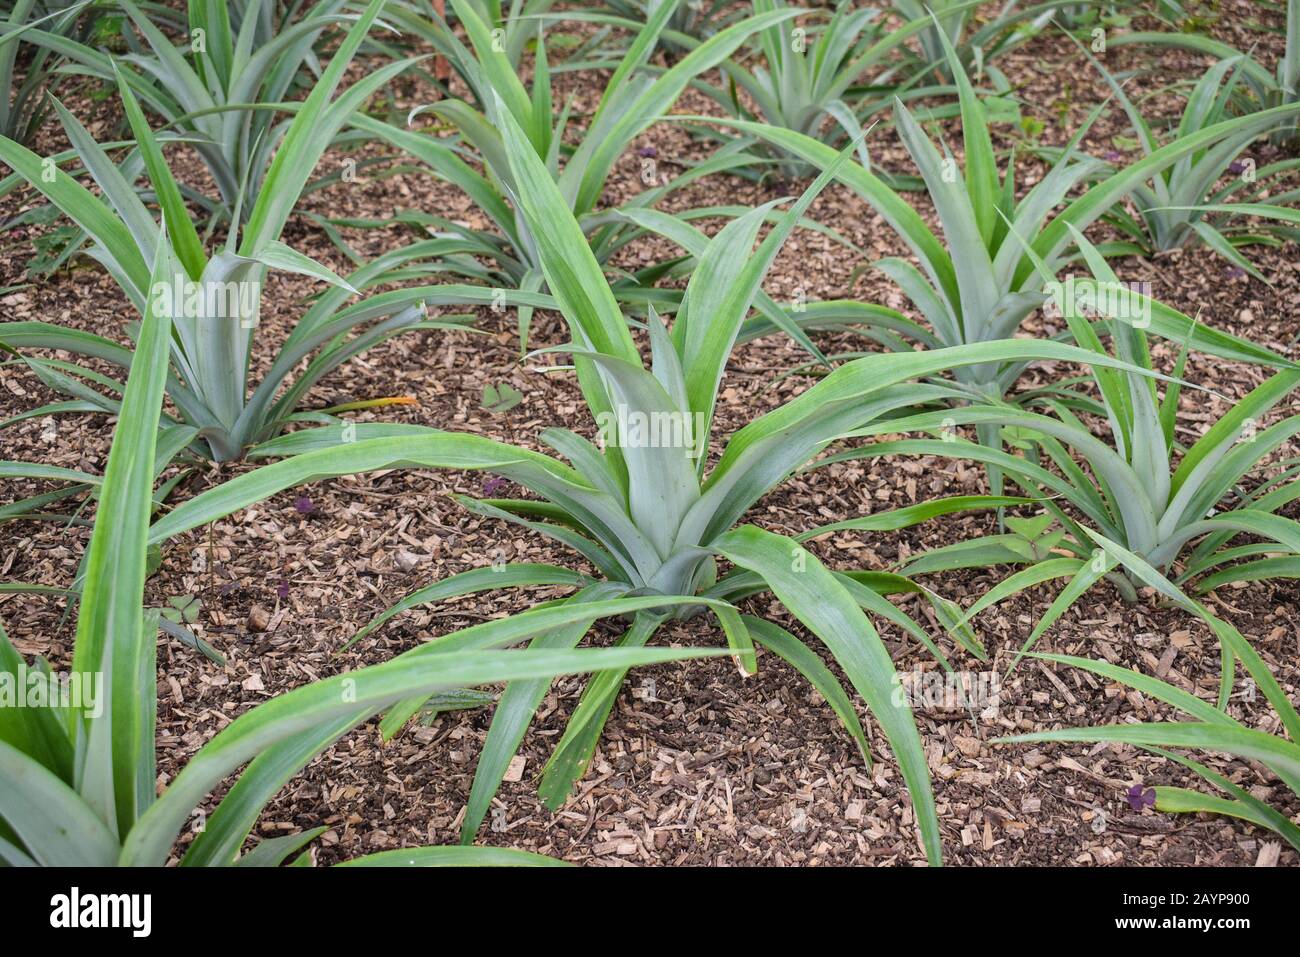 Pineapple plants in a greenhouse Stock Photo